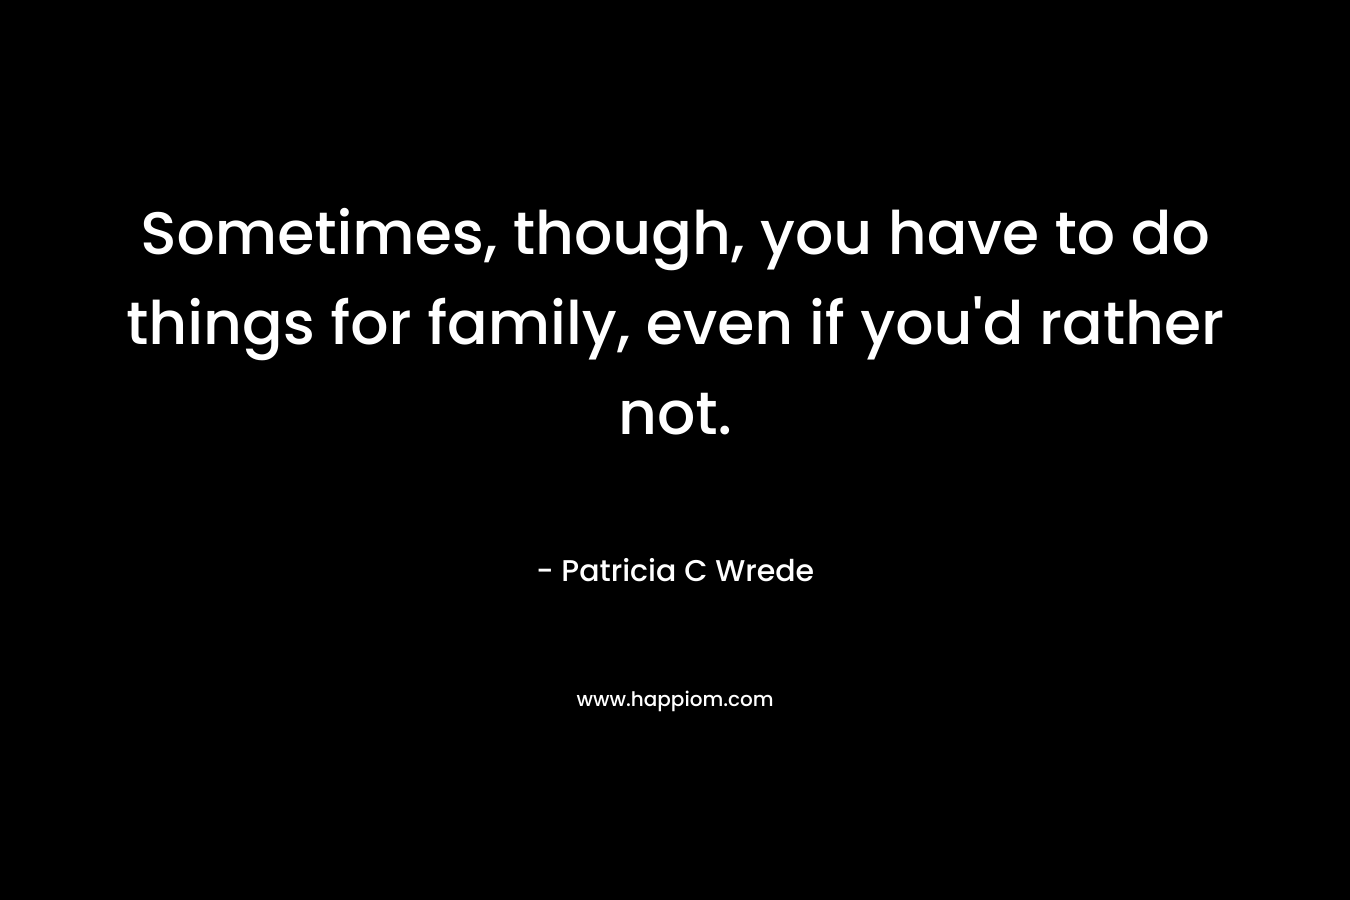 Sometimes, though, you have to do things for family, even if you’d rather not. – Patricia C Wrede